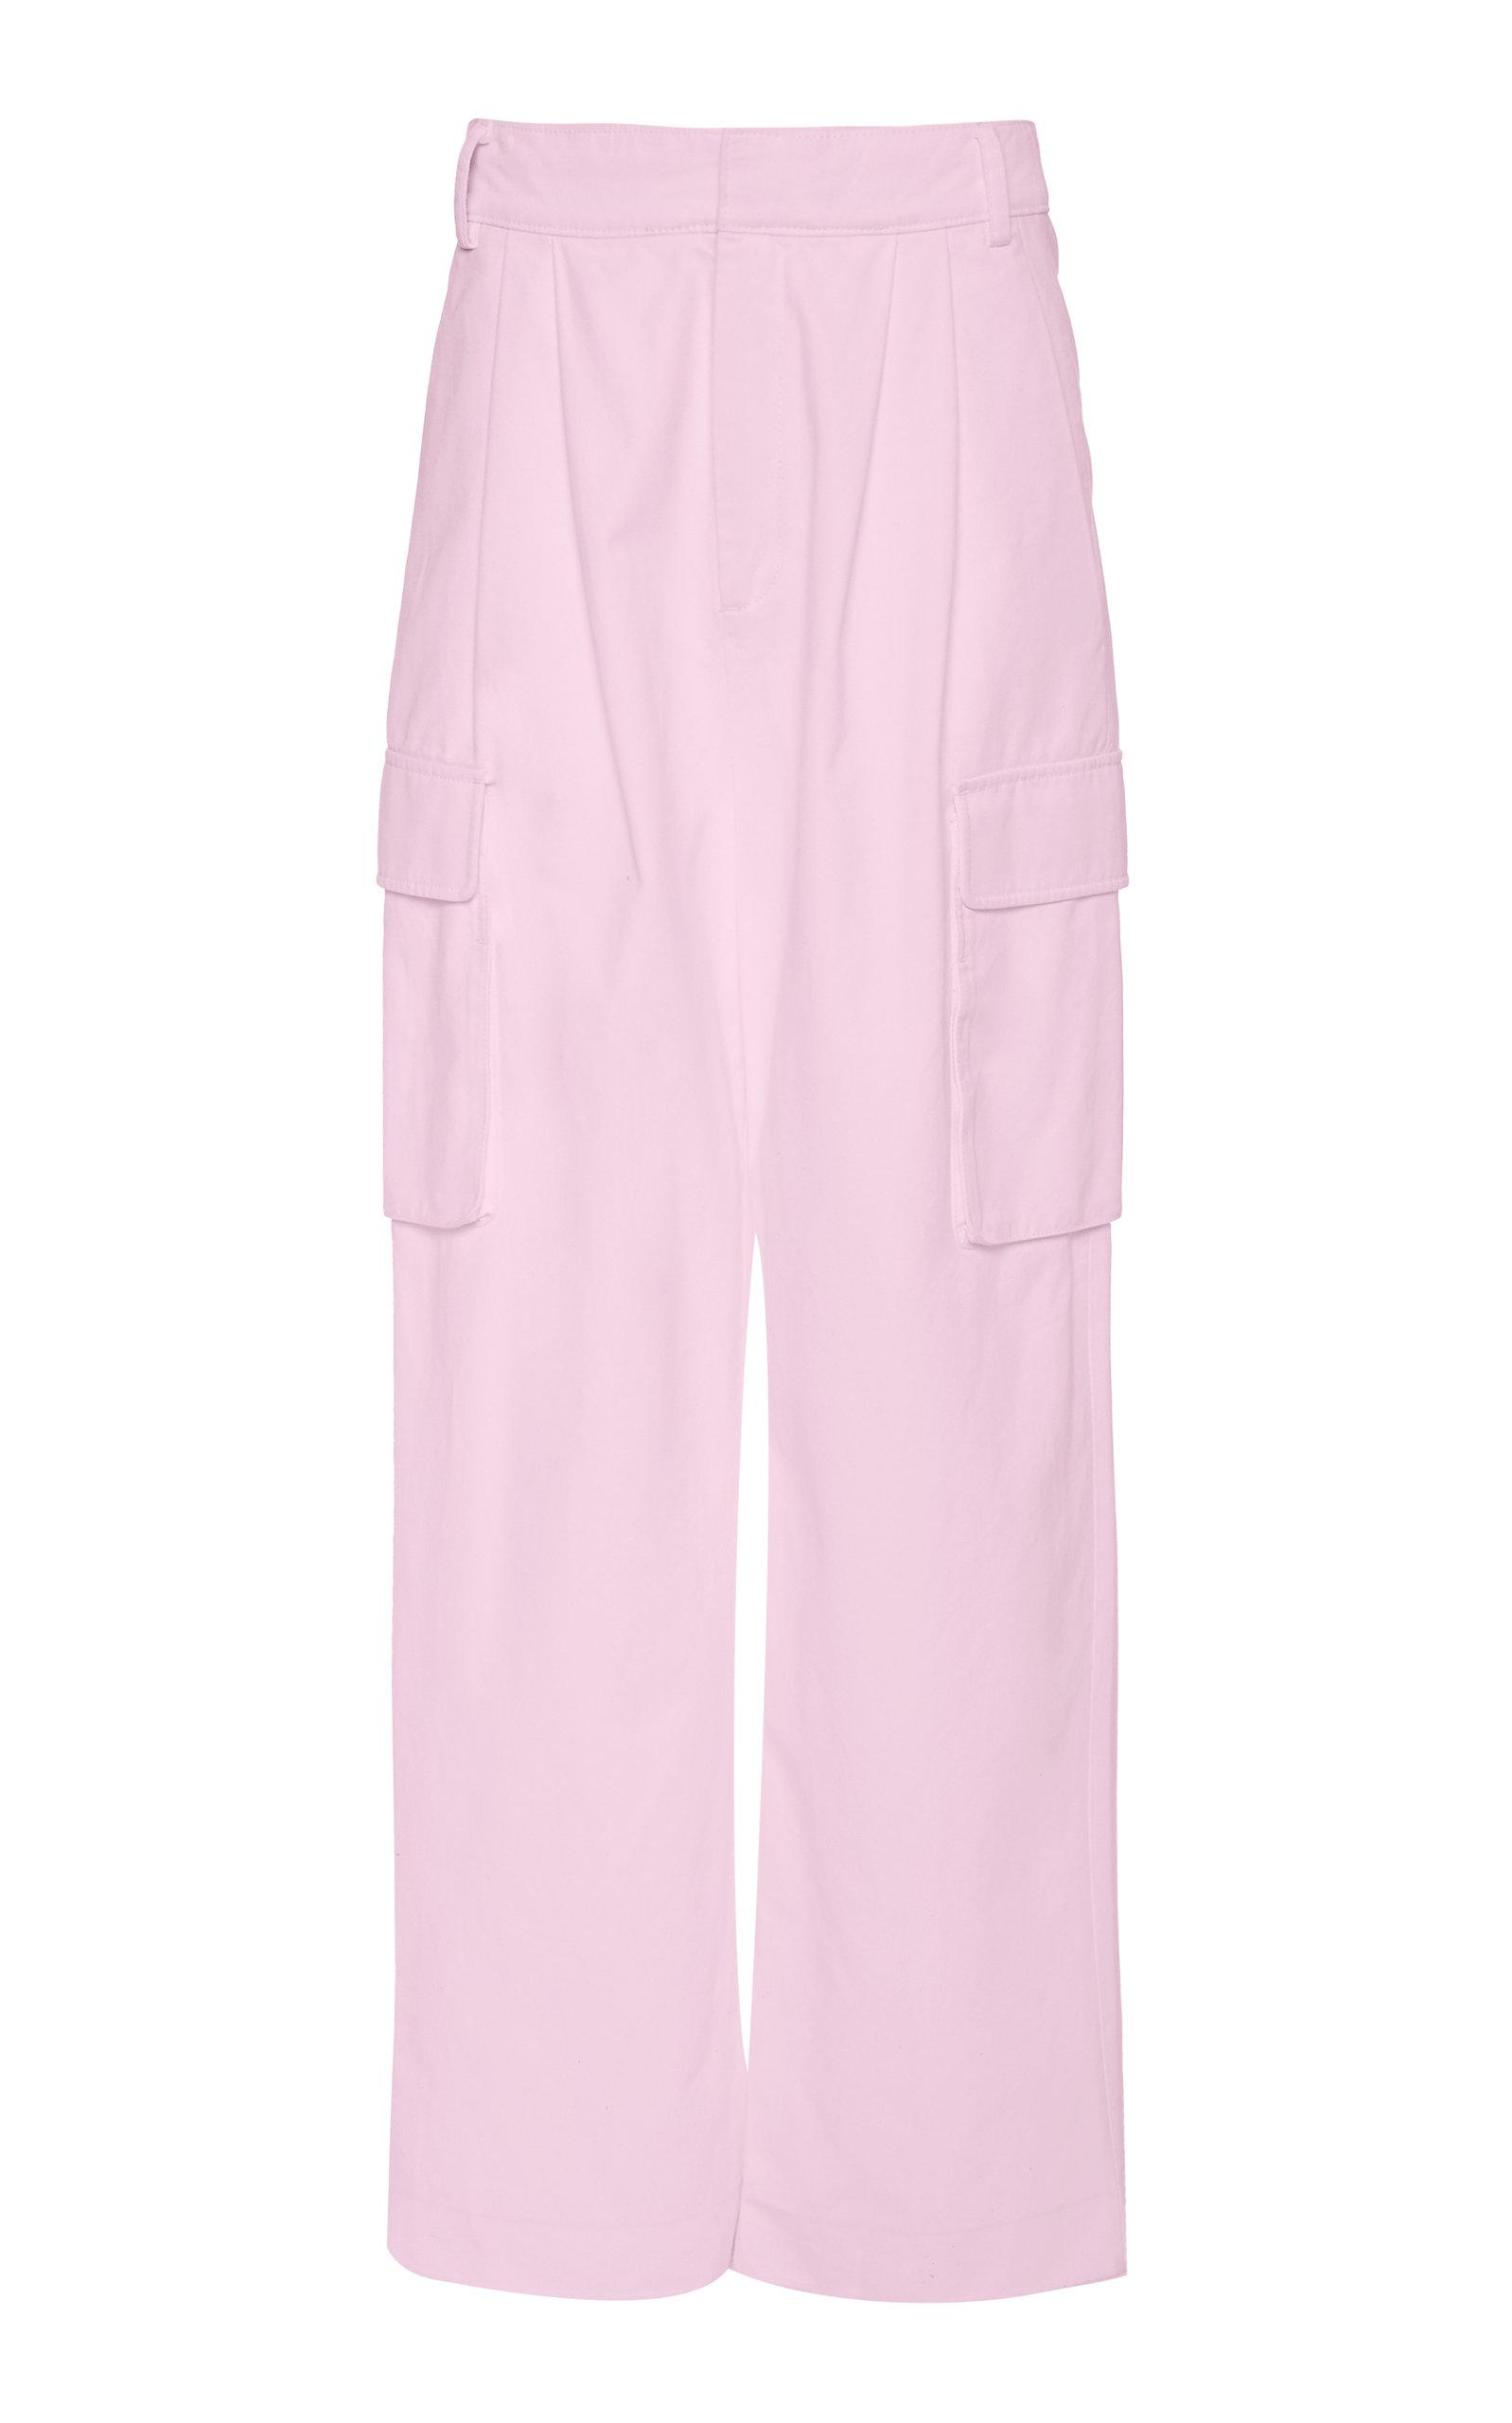 Tibi Synthetic Nylon Pleated Cargo Pant in Pink for Men - Lyst